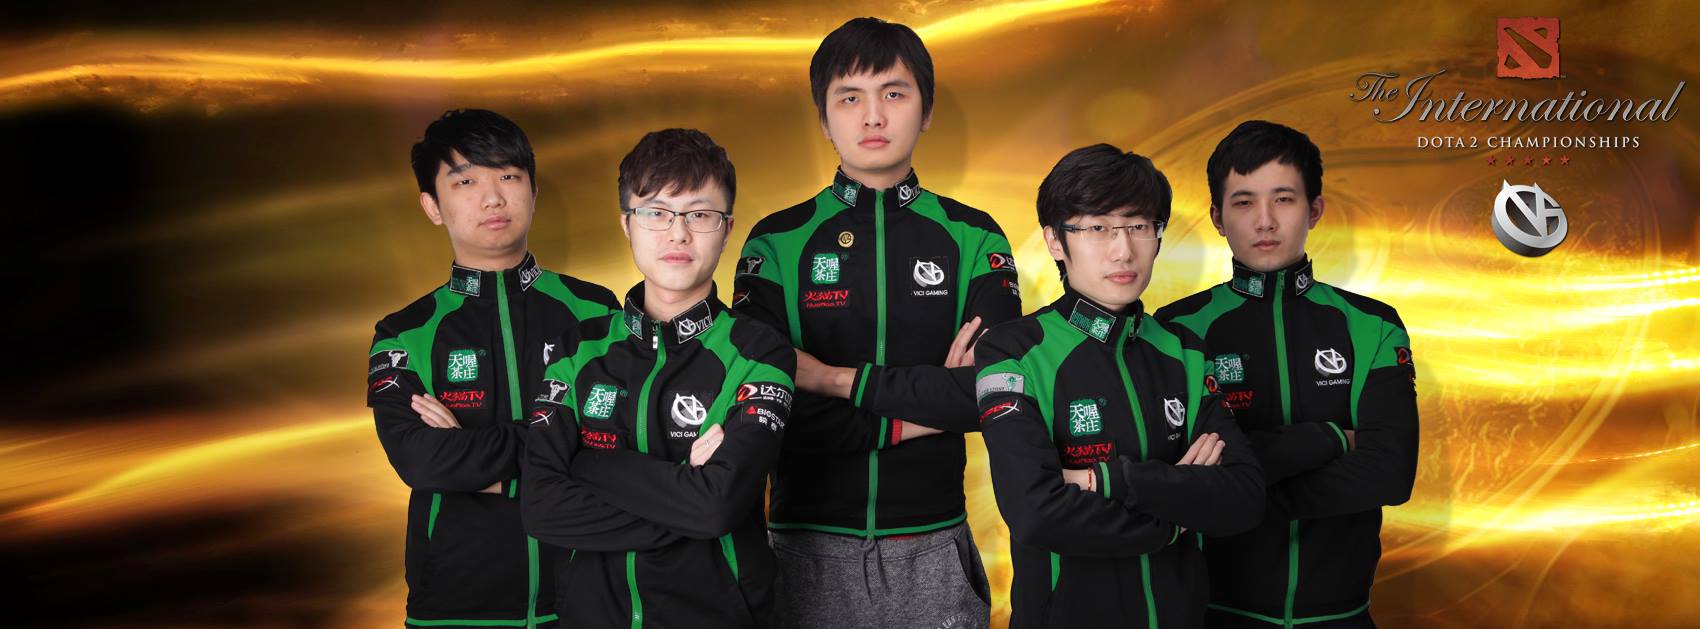 Daryl 'iceiceice' Koh (middle) plays for Vici Gaming, a team coming into the tournament as one of the favourites has been underperforming.